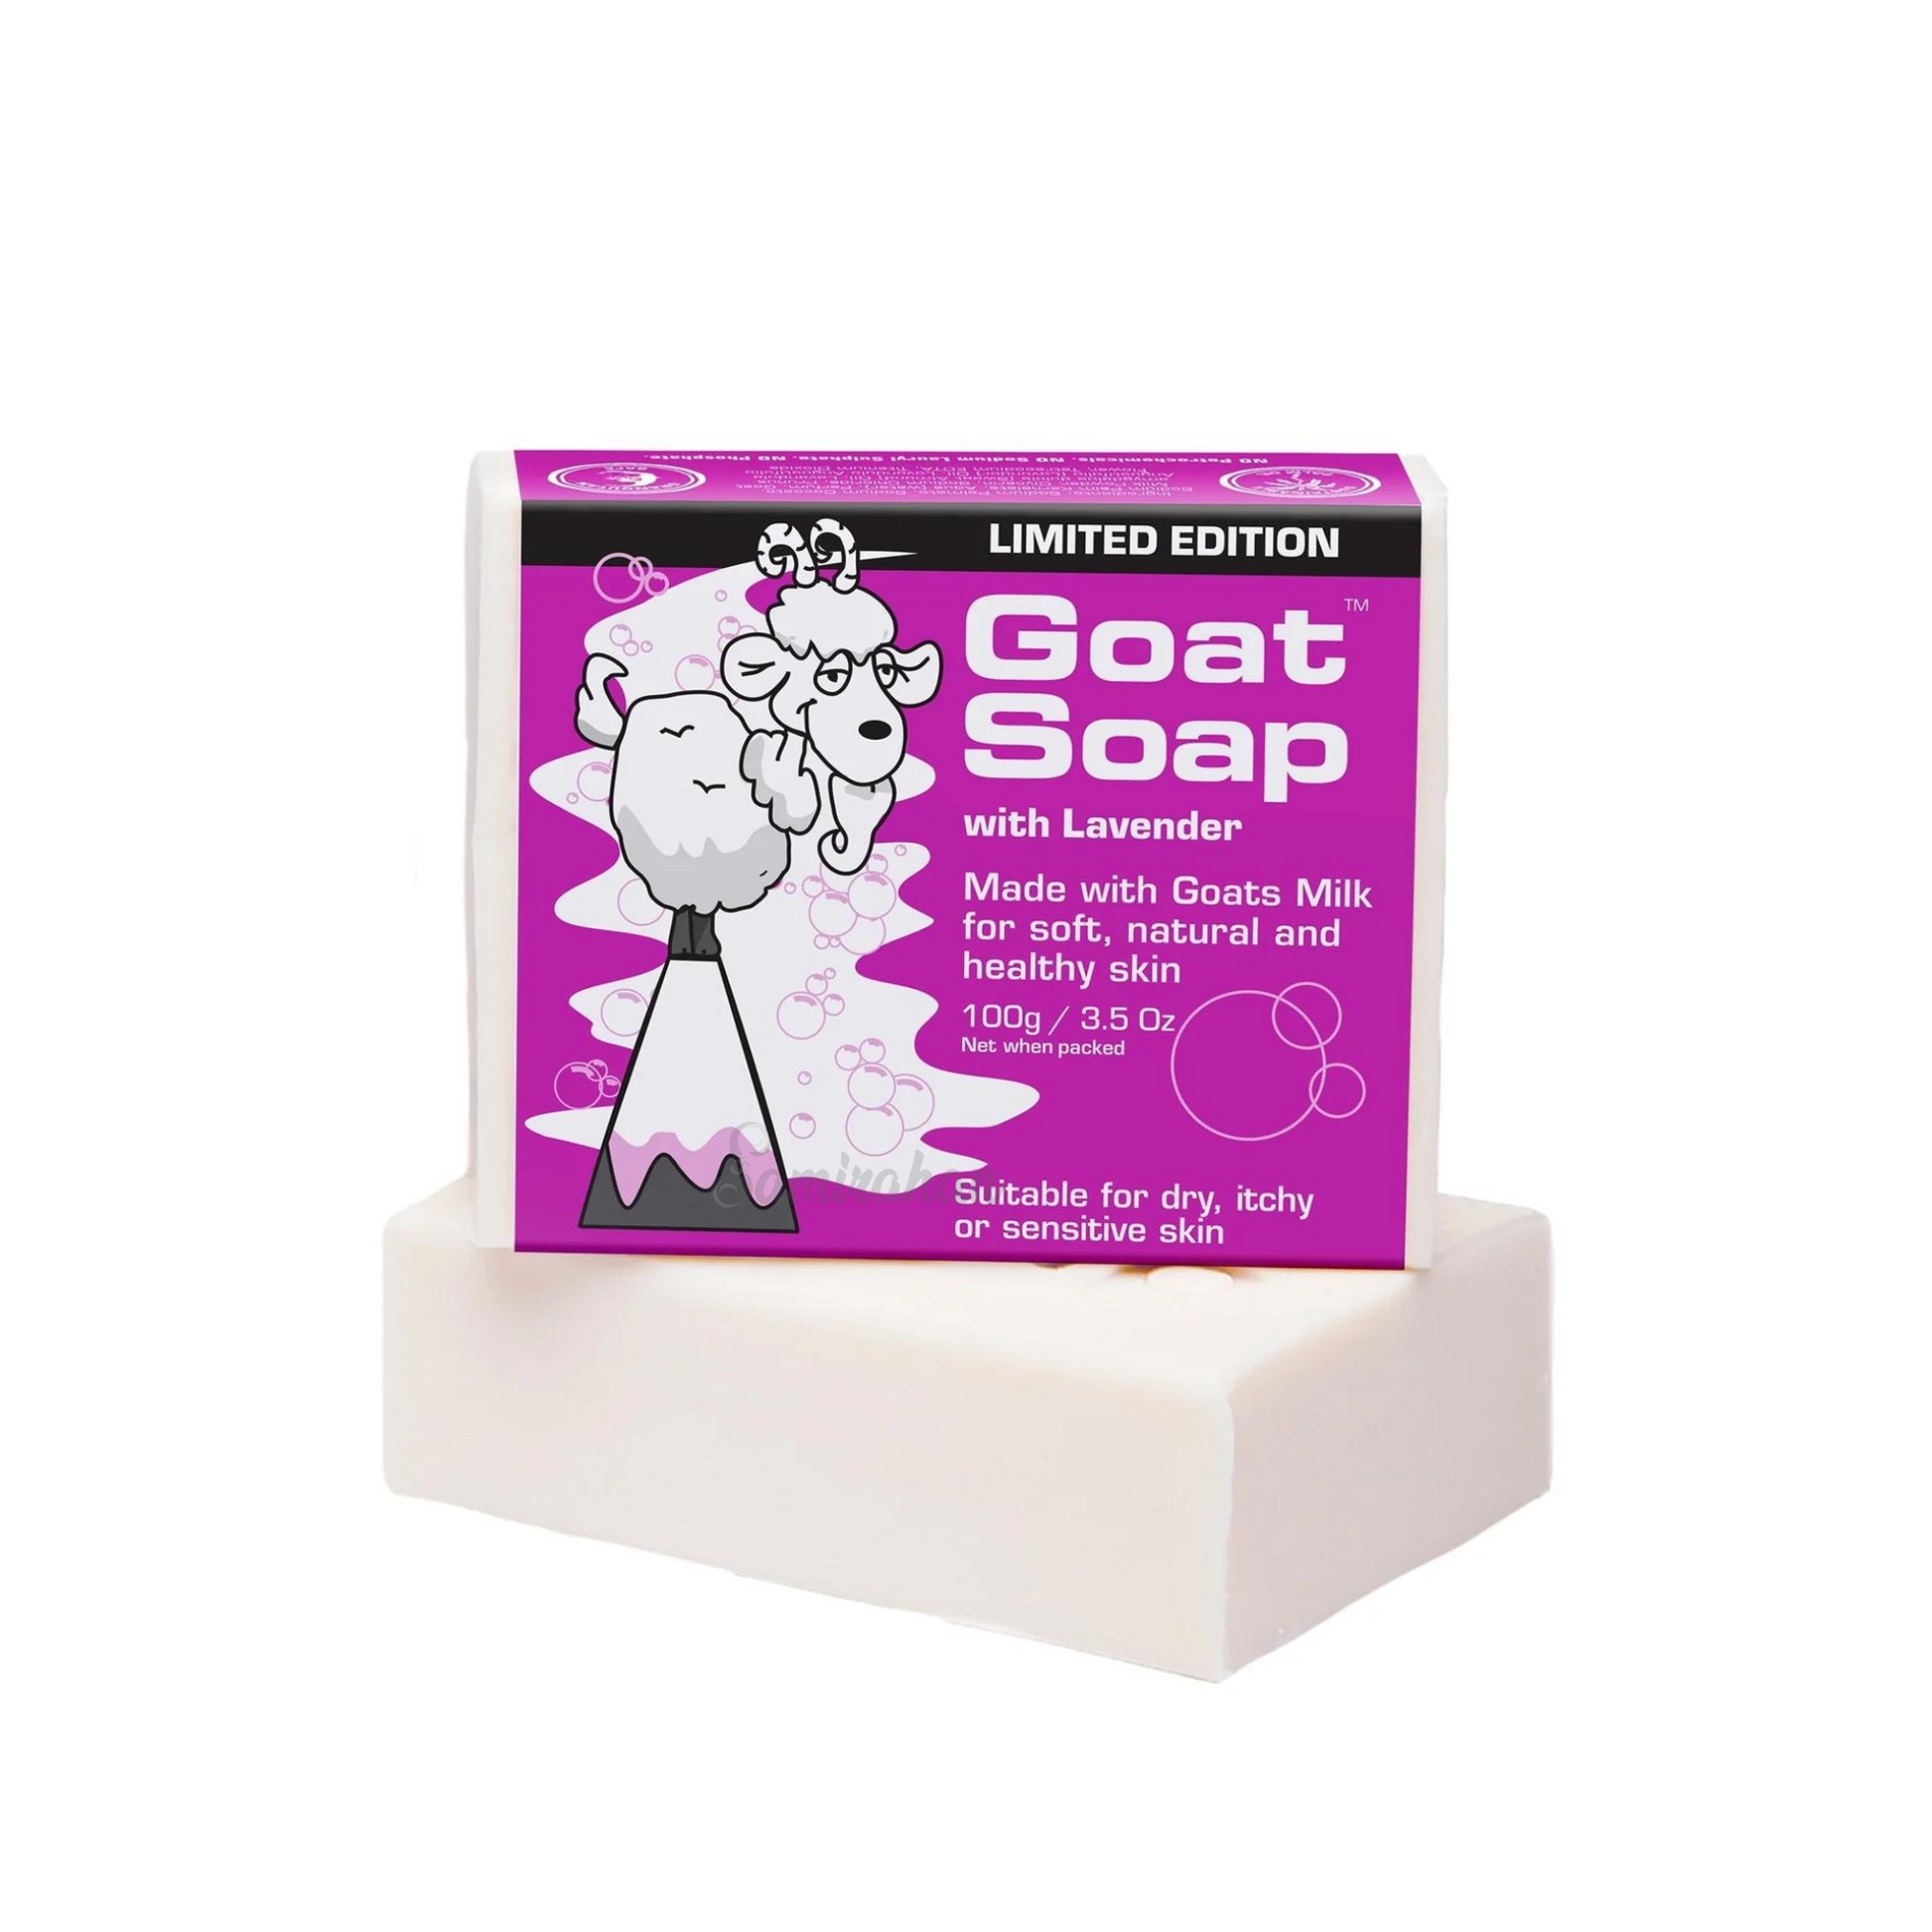 Goat Milk Soap contains calming, aromatic Australian lavender oil & flowers. It gently cleans & exfoliates. Suitable for dry, itchy, sensitive eczema-prone skin. Best imported foreign Aussie genuine authentic premium real quality skincare beauty luxury bath soap price in Dhaka Chittagong Sylhet Bangladesh.